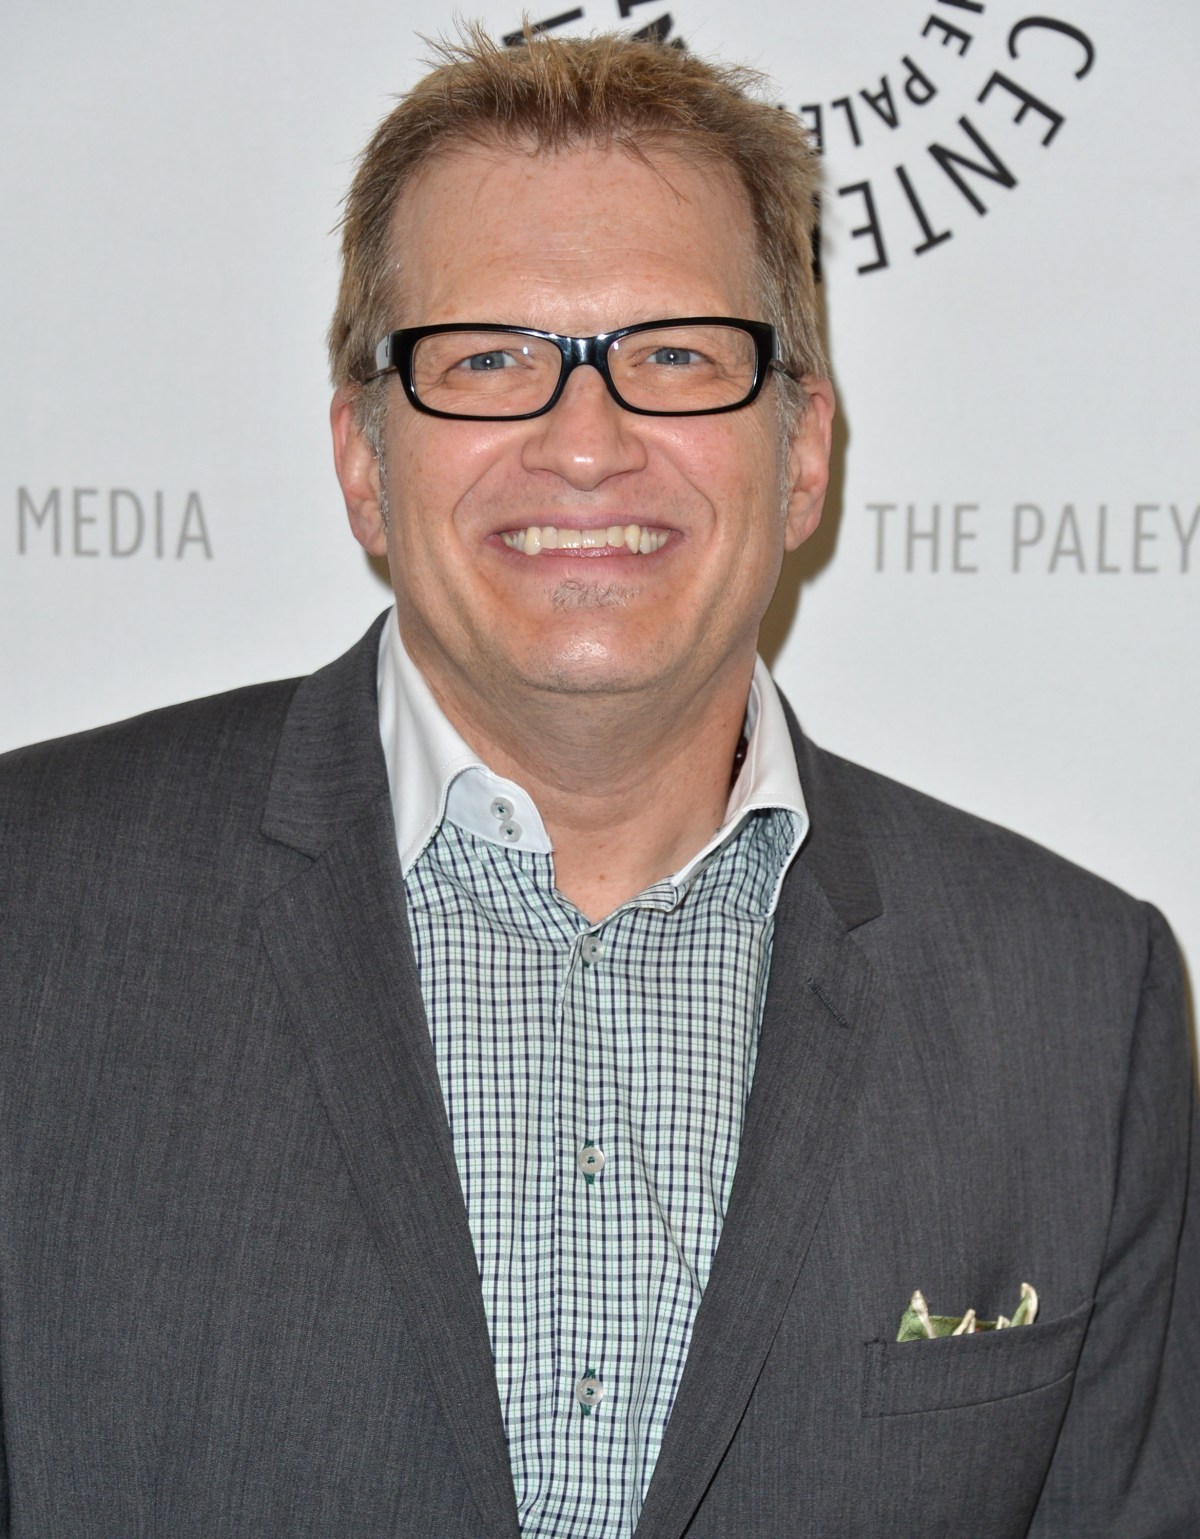 Drew Carey's Net Worth How Much Money Has the TV Host Earned?